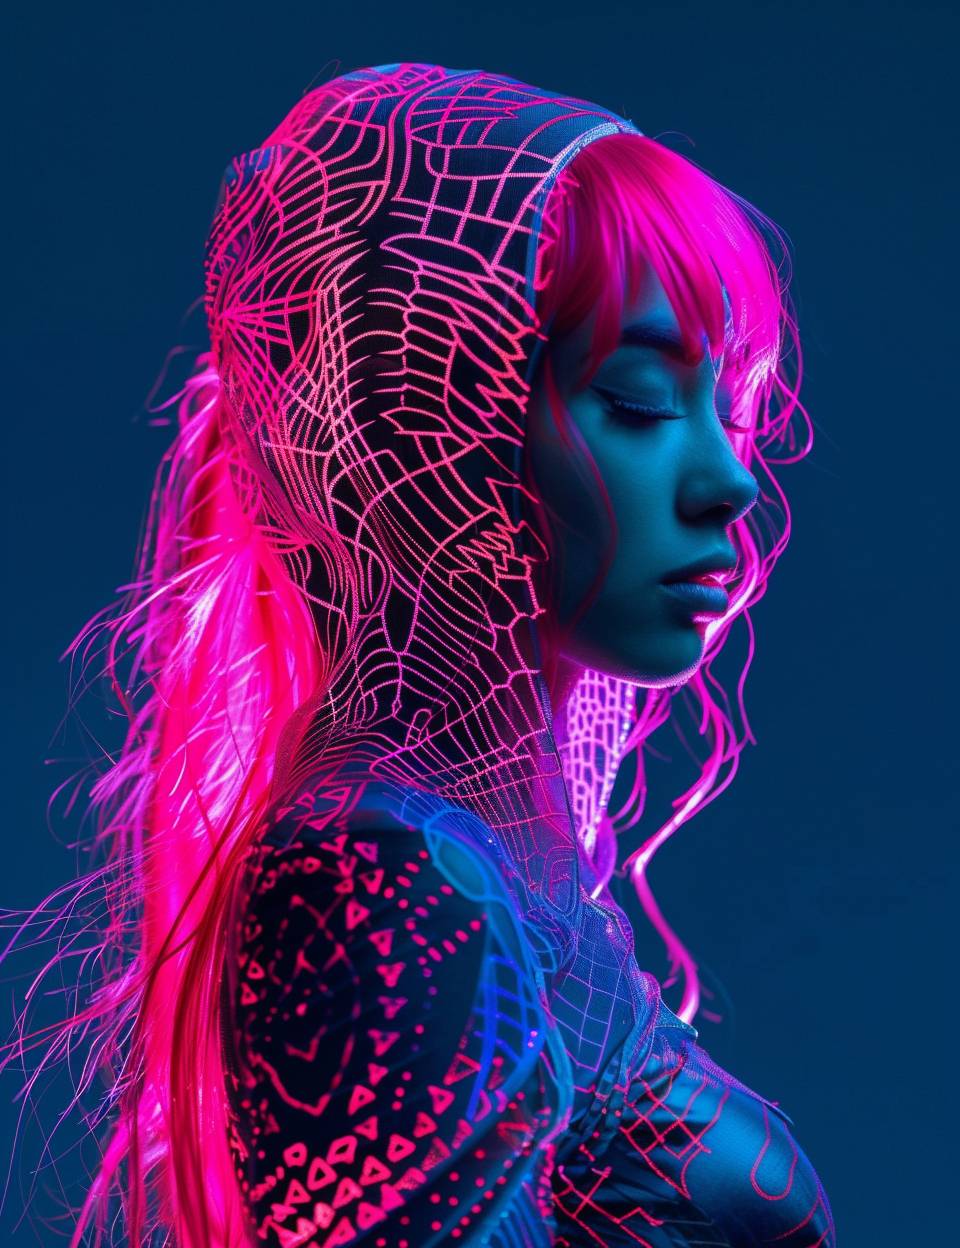 Futuristic Fashionista, Full Body Portrait, Taken with Sony Alpha 1, In a highly detailed photo, a stunning young woman with hot pink hair showcases a translucent tight bodysuit with intricate Retro Futurist Dadaism geometric patterns. The sharpness of the image highlights the intricate details and translucent surfaces of her outfit. Her dynamic pose and the futuristic patterns make her look like a vision from a sci-fi utopia.